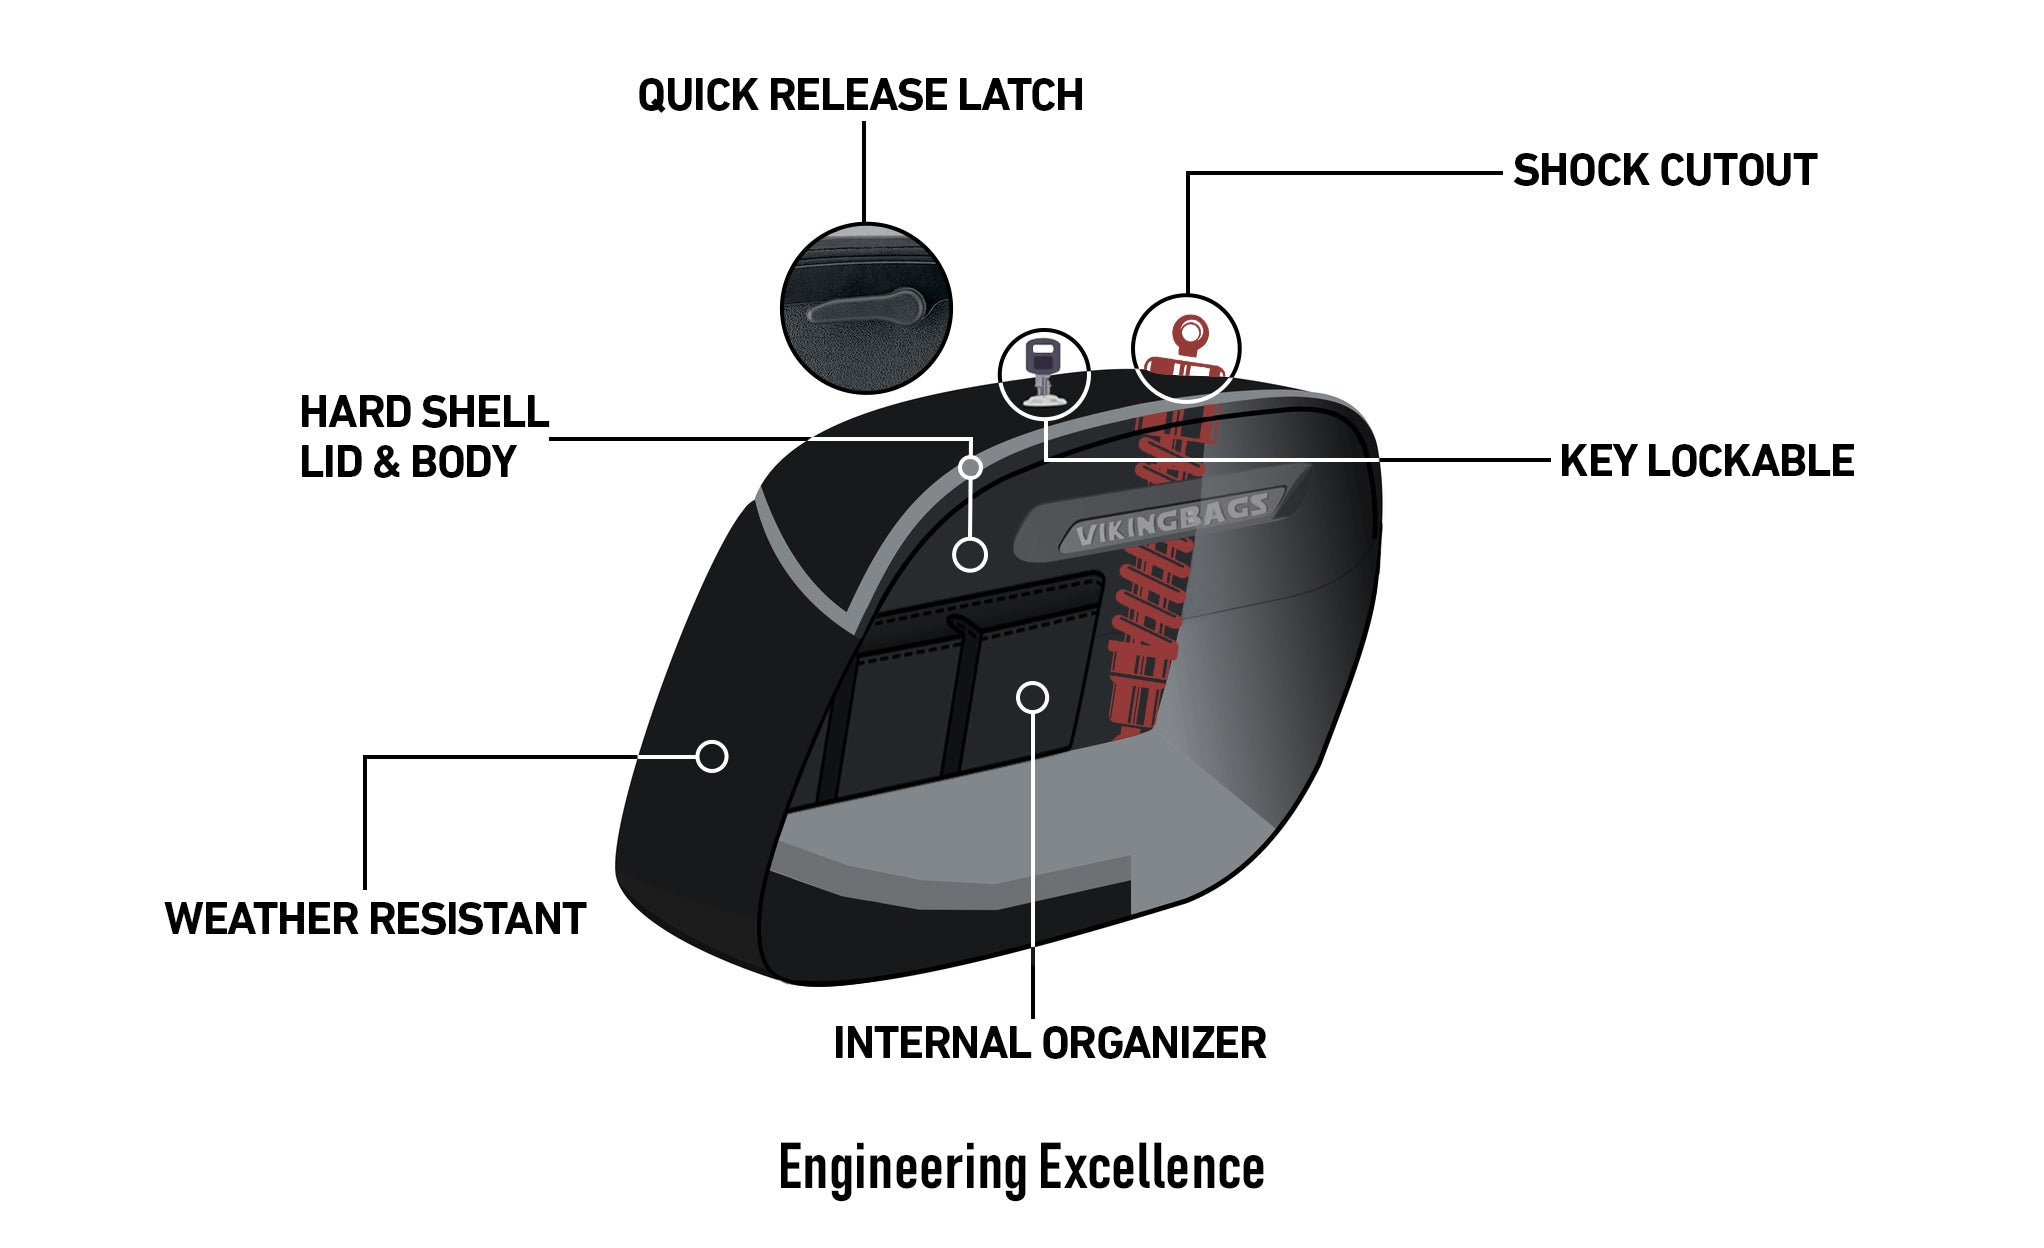 Viking Lamellar Raven Extra Large Shock Cutout Matte Hard Saddlebags For Harley Sportster 72 Xl1200V Engineering Excellence with Bag on Bike @expand